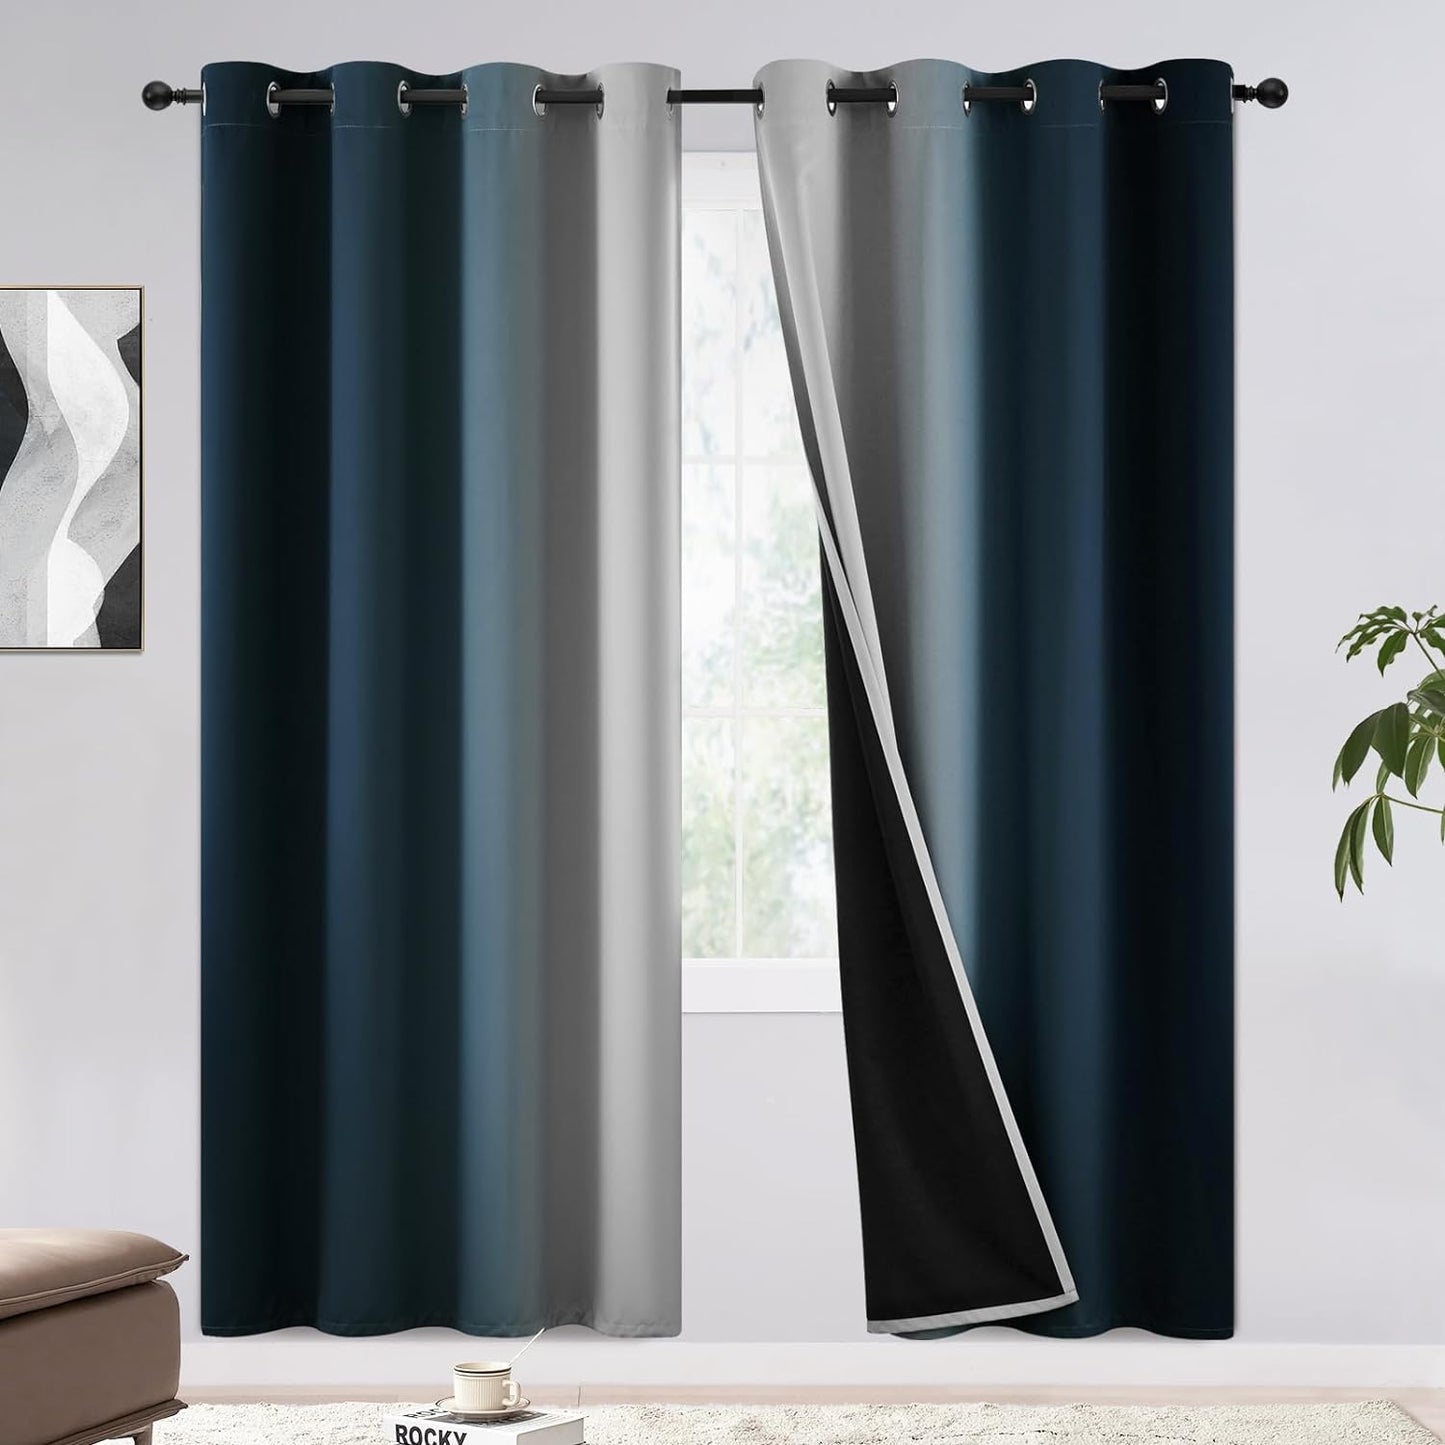 COSVIYA 100% Blackout Curtains & Drapes Ombre Purple Curtains 63 Inch Length 2 Panels,Full Room Darkening Grommet Gradient Insulated Thermal Window Curtains for Bedroom/Living Room,52X63 Inches  COSVIYA Blackout Navy To Grayish White 52W X 72L 